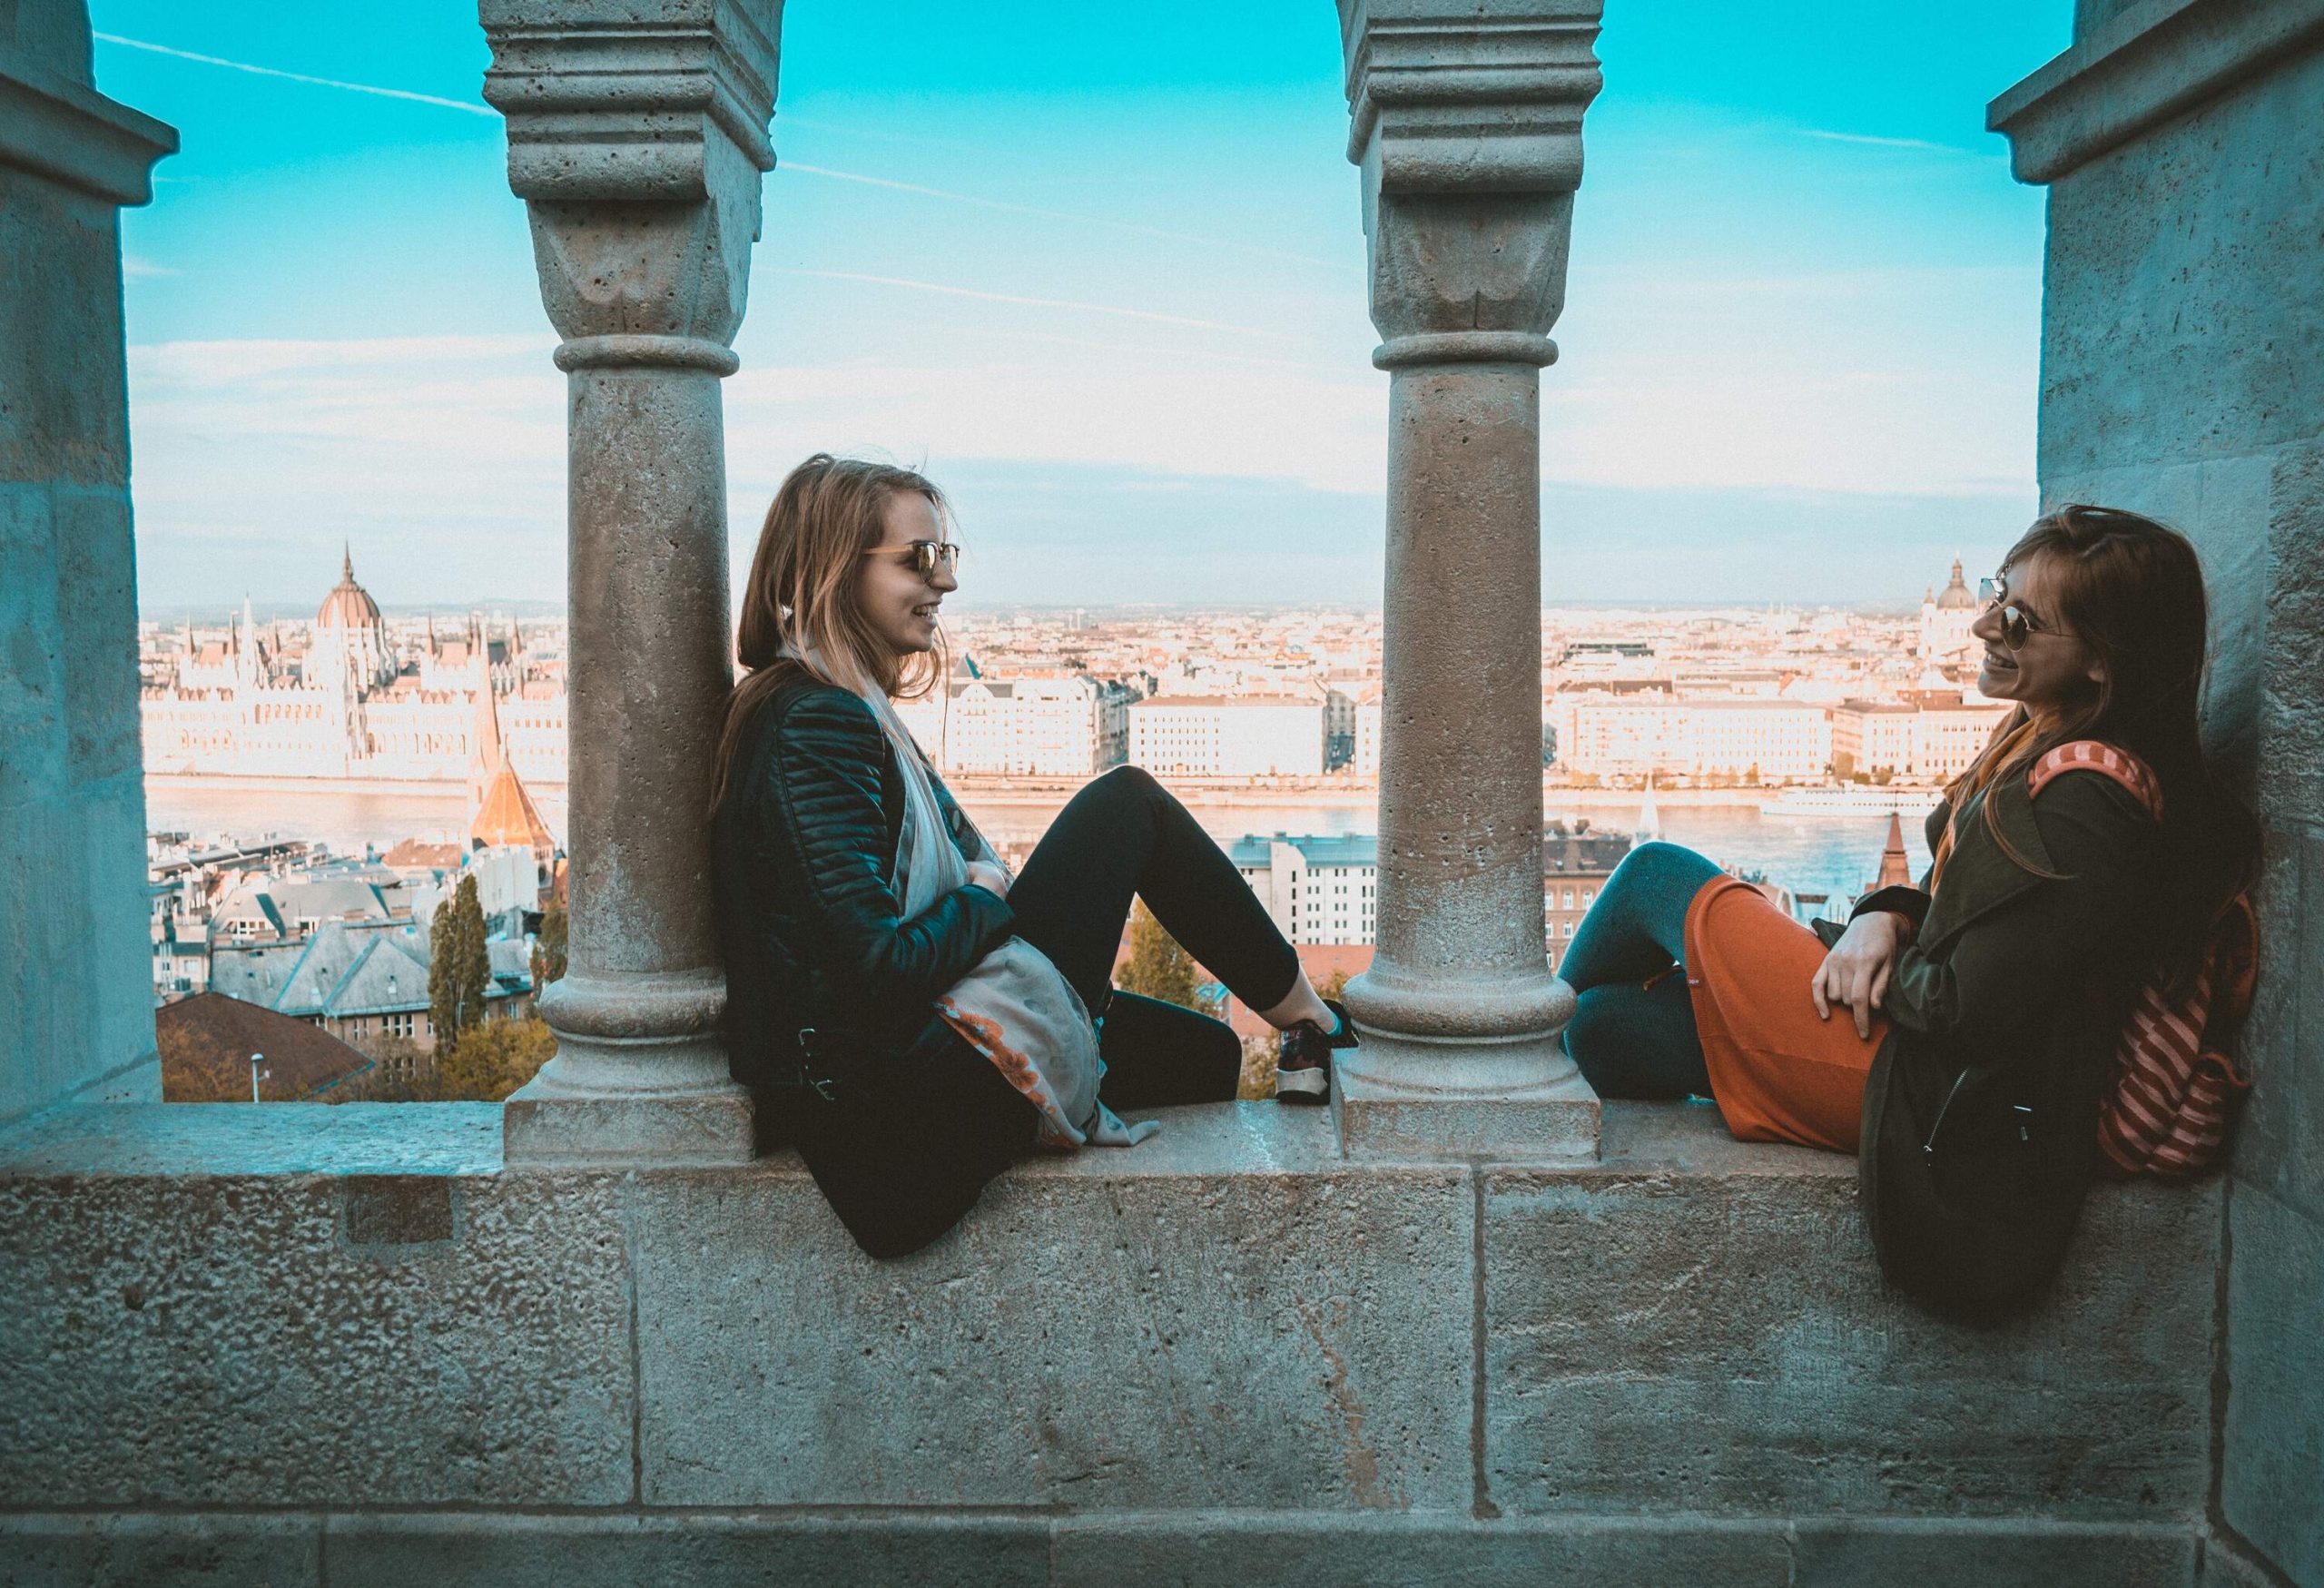 Two female friends talk while sitting on a pillared balcony's ledge.